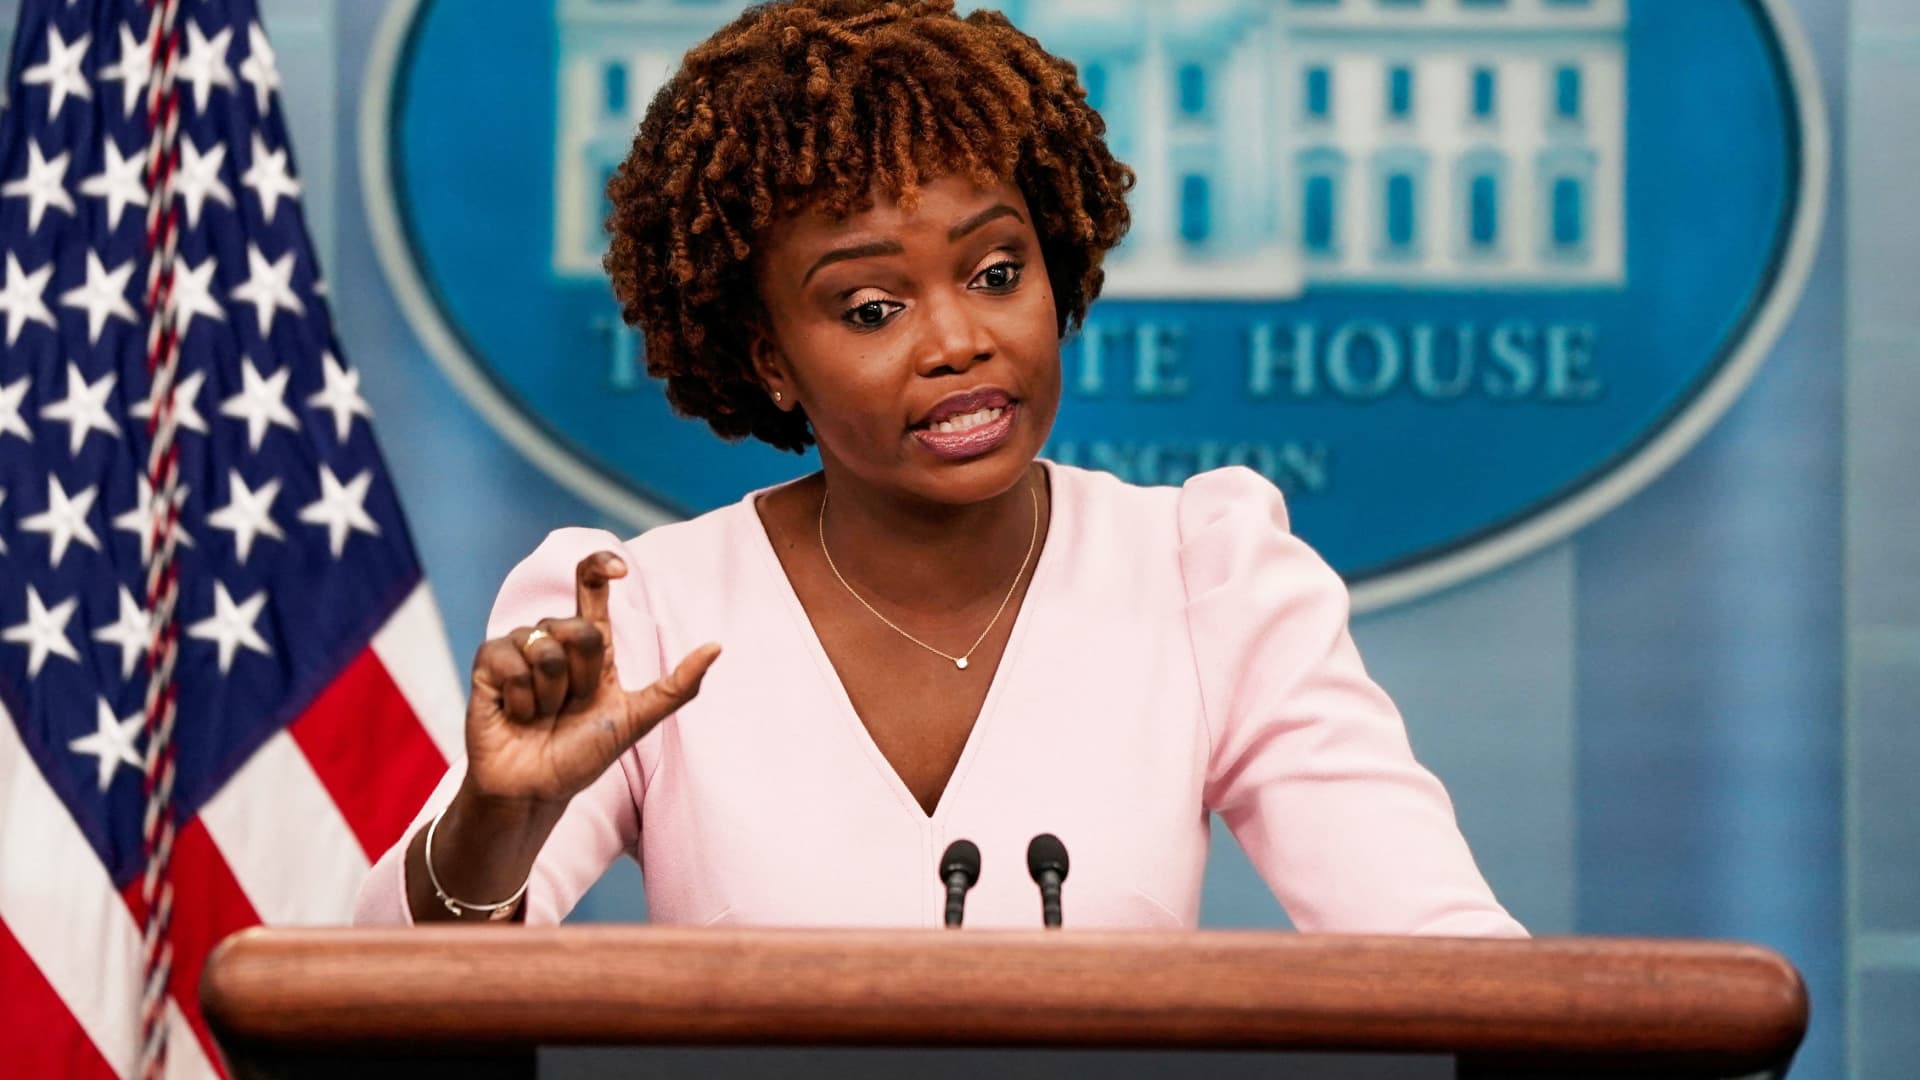 White House Press Secretary Karine Jean-Pierre speaks during a daily press briefing at the White House in Washington, June 13, 2022.